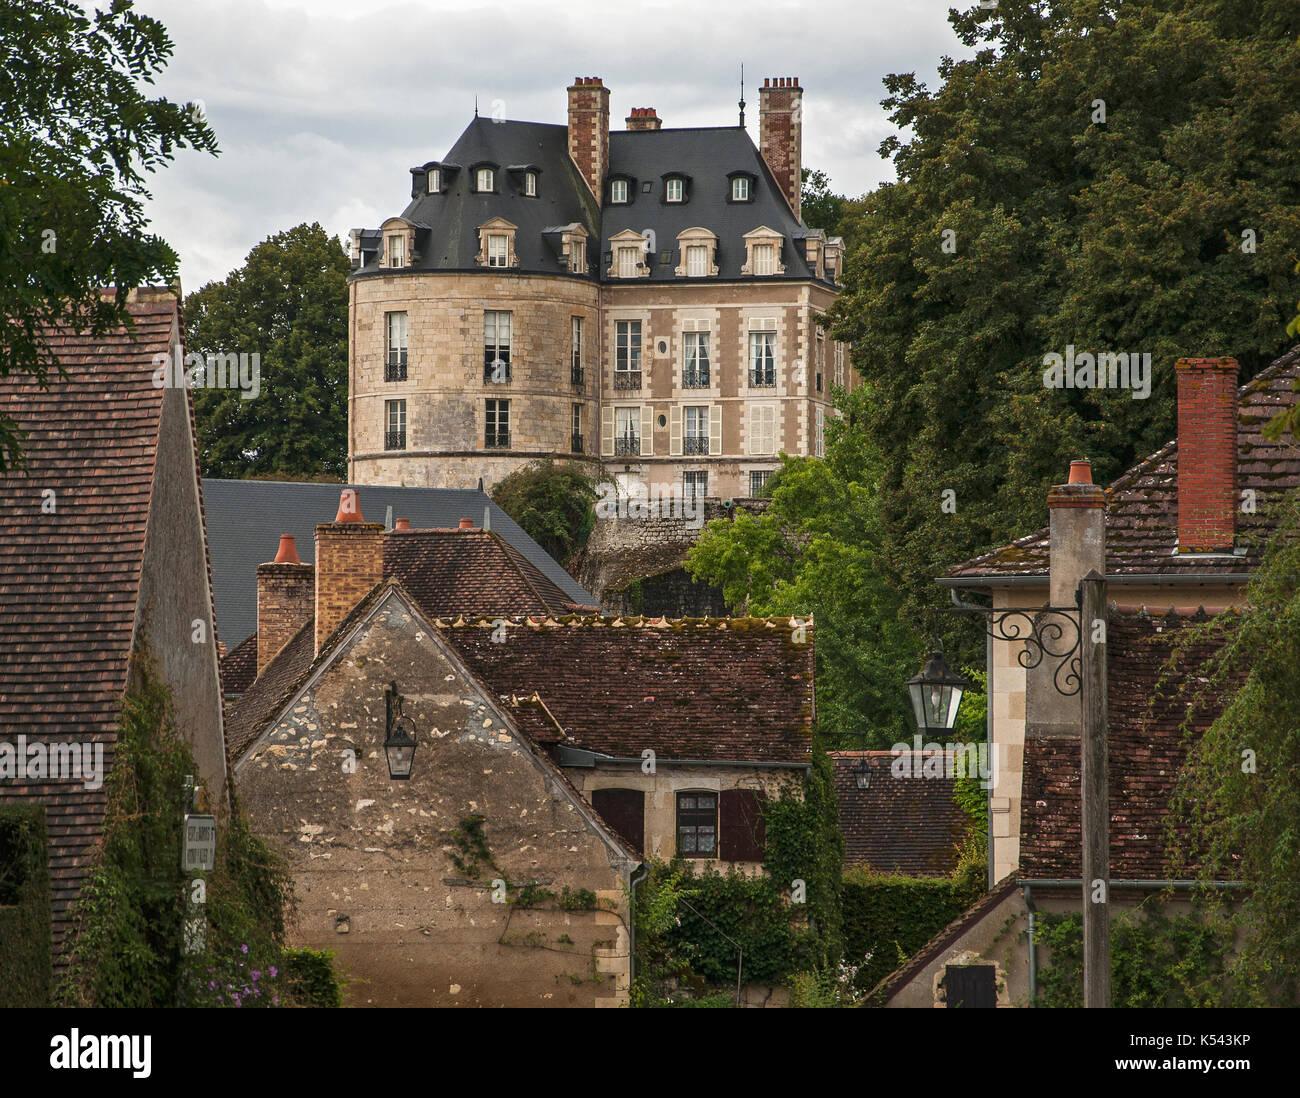 Castle and the village of Apremont-sur-Allier. Apremont belongs to the list of the most beautiful villages in France  ©alexander h. schulz Stock Photo